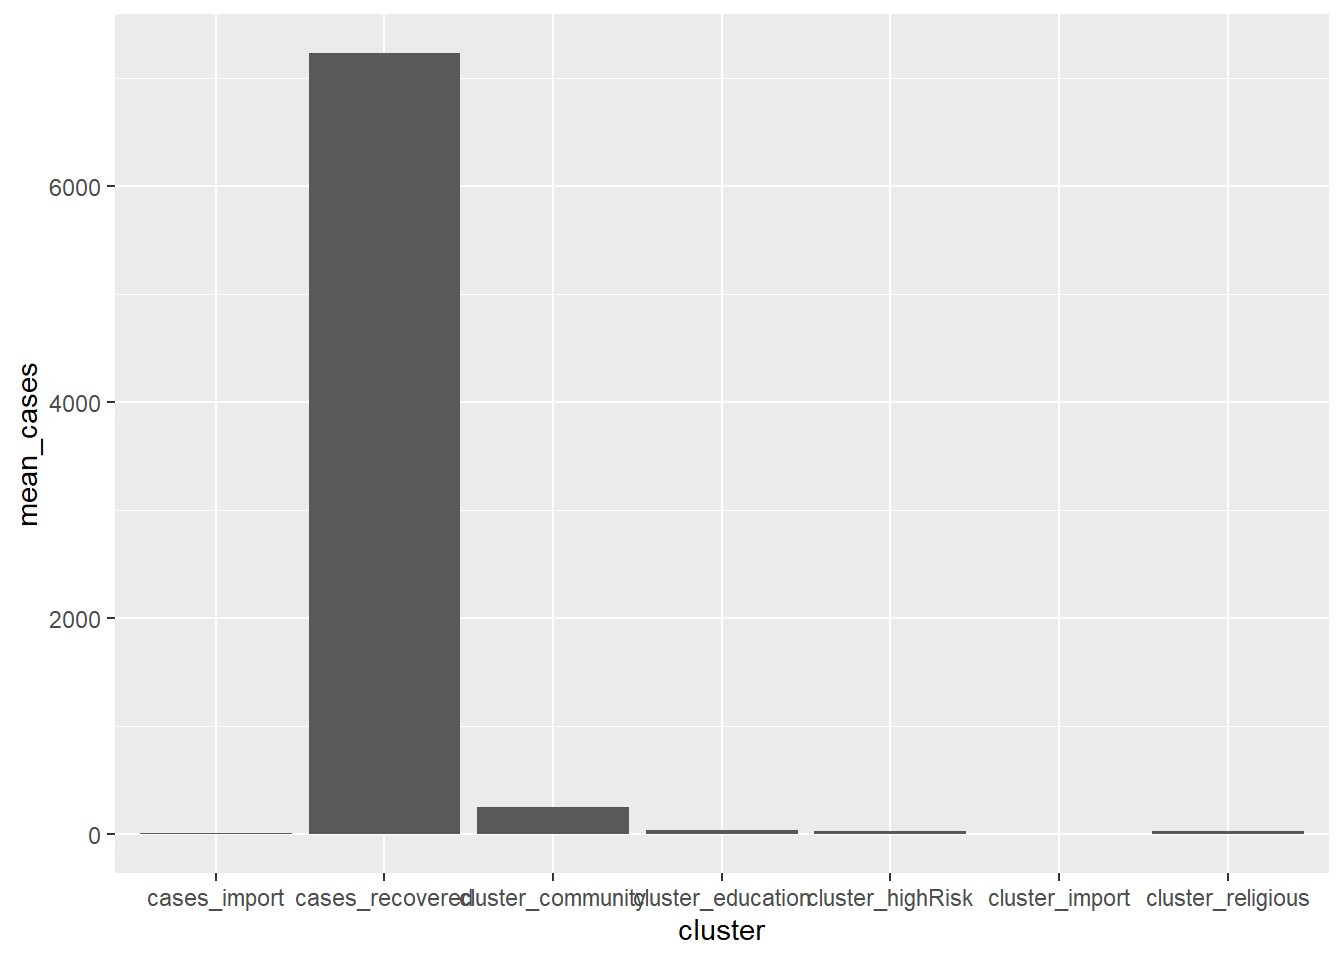 Bar chart of the mean for each cluster